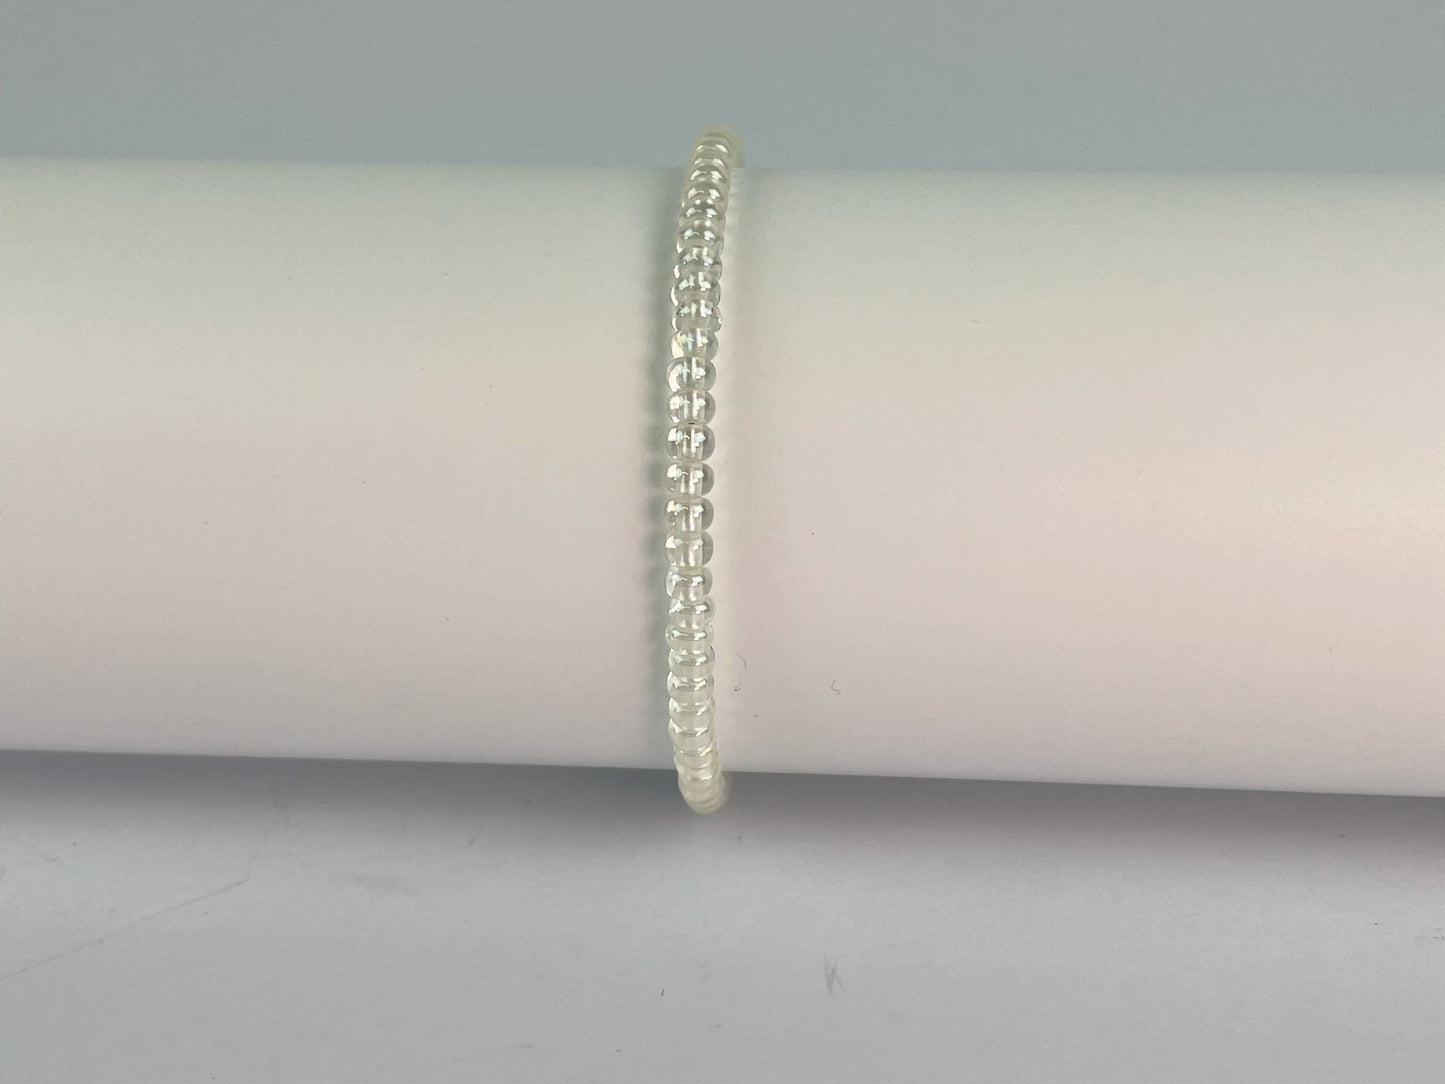 Simple glass 4mm beads form this elasticated stacking bracelet